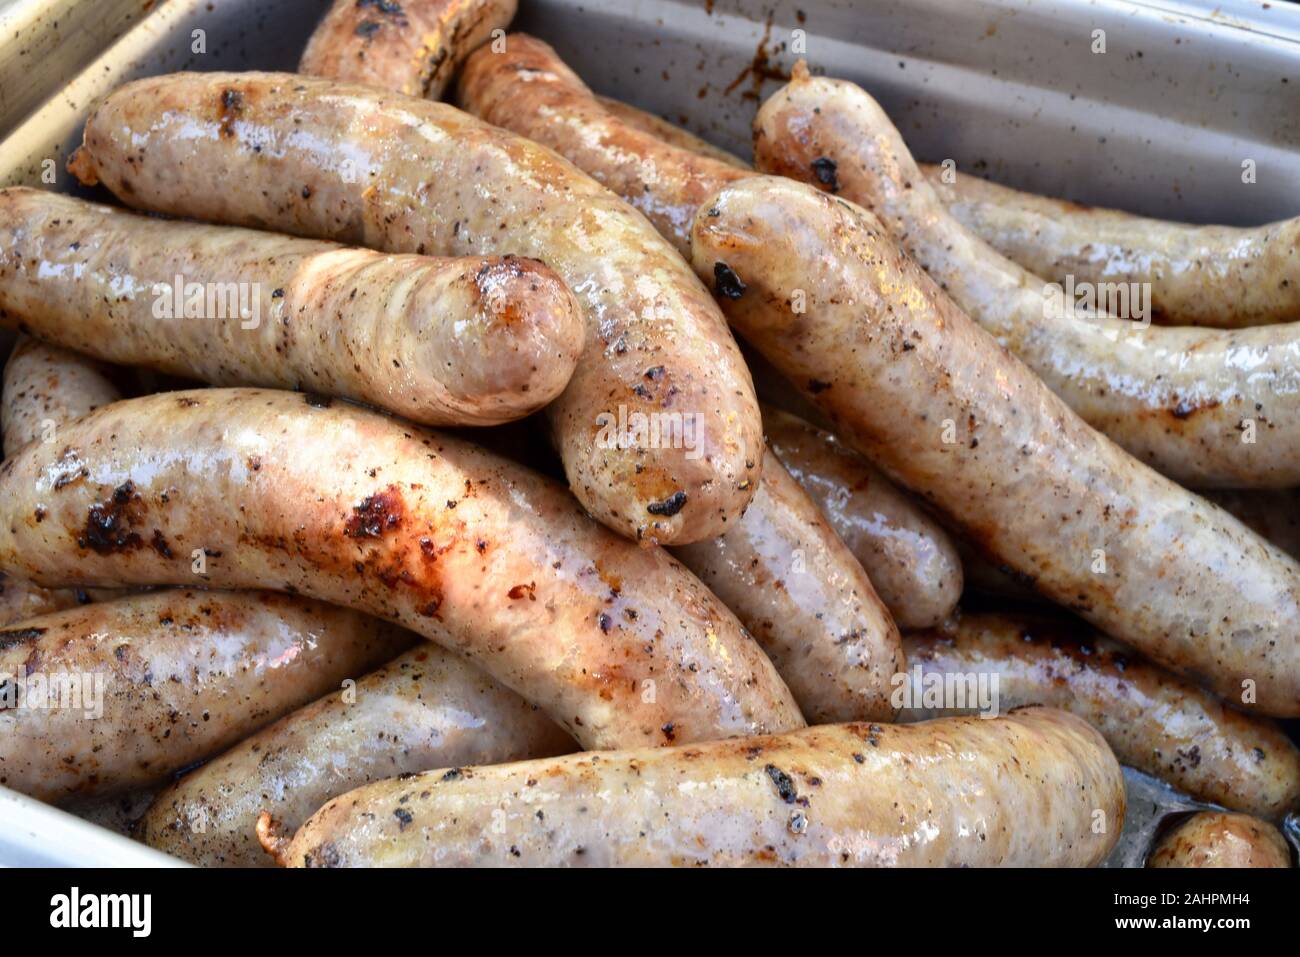 Grilled bratwurst sausages piled up in a serving tray for sale at Oktoberfest held in the Swiss-American community of New Glarus, Wisconsin, USA. Stock Photo